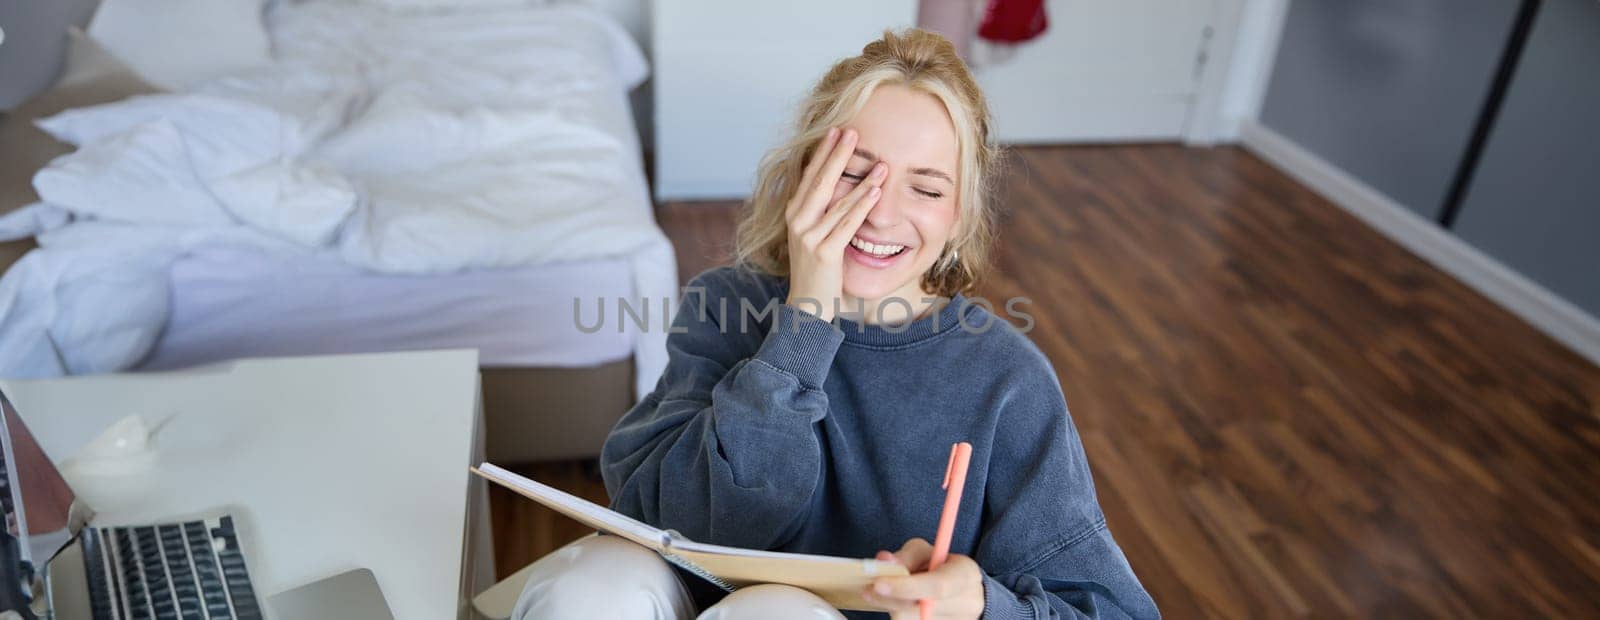 Portrait of charismatic blond girl, smiling woman in bedroom, holding notebook and pen, writing in journal or diary, creates to do list in planner.